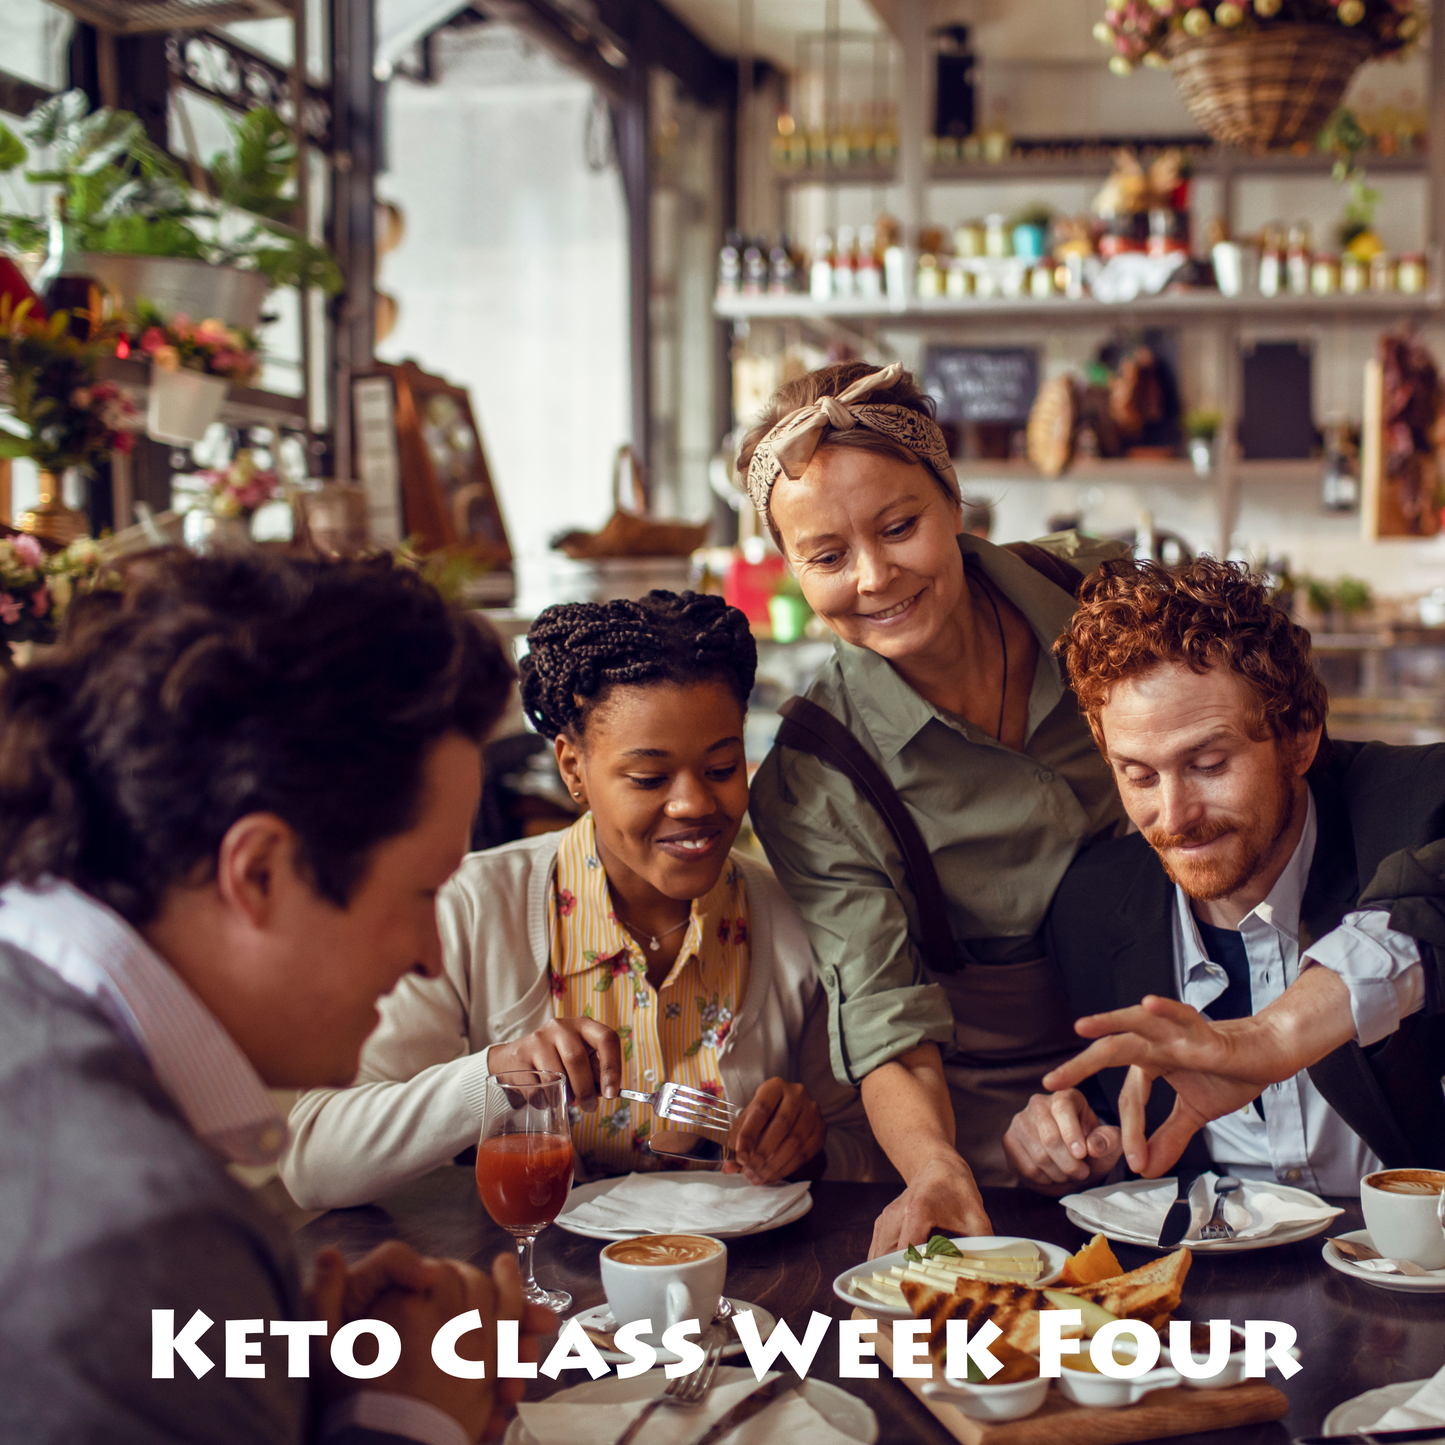 Keto Class Week 4—Going out on Keto: Restaurant and vacation support